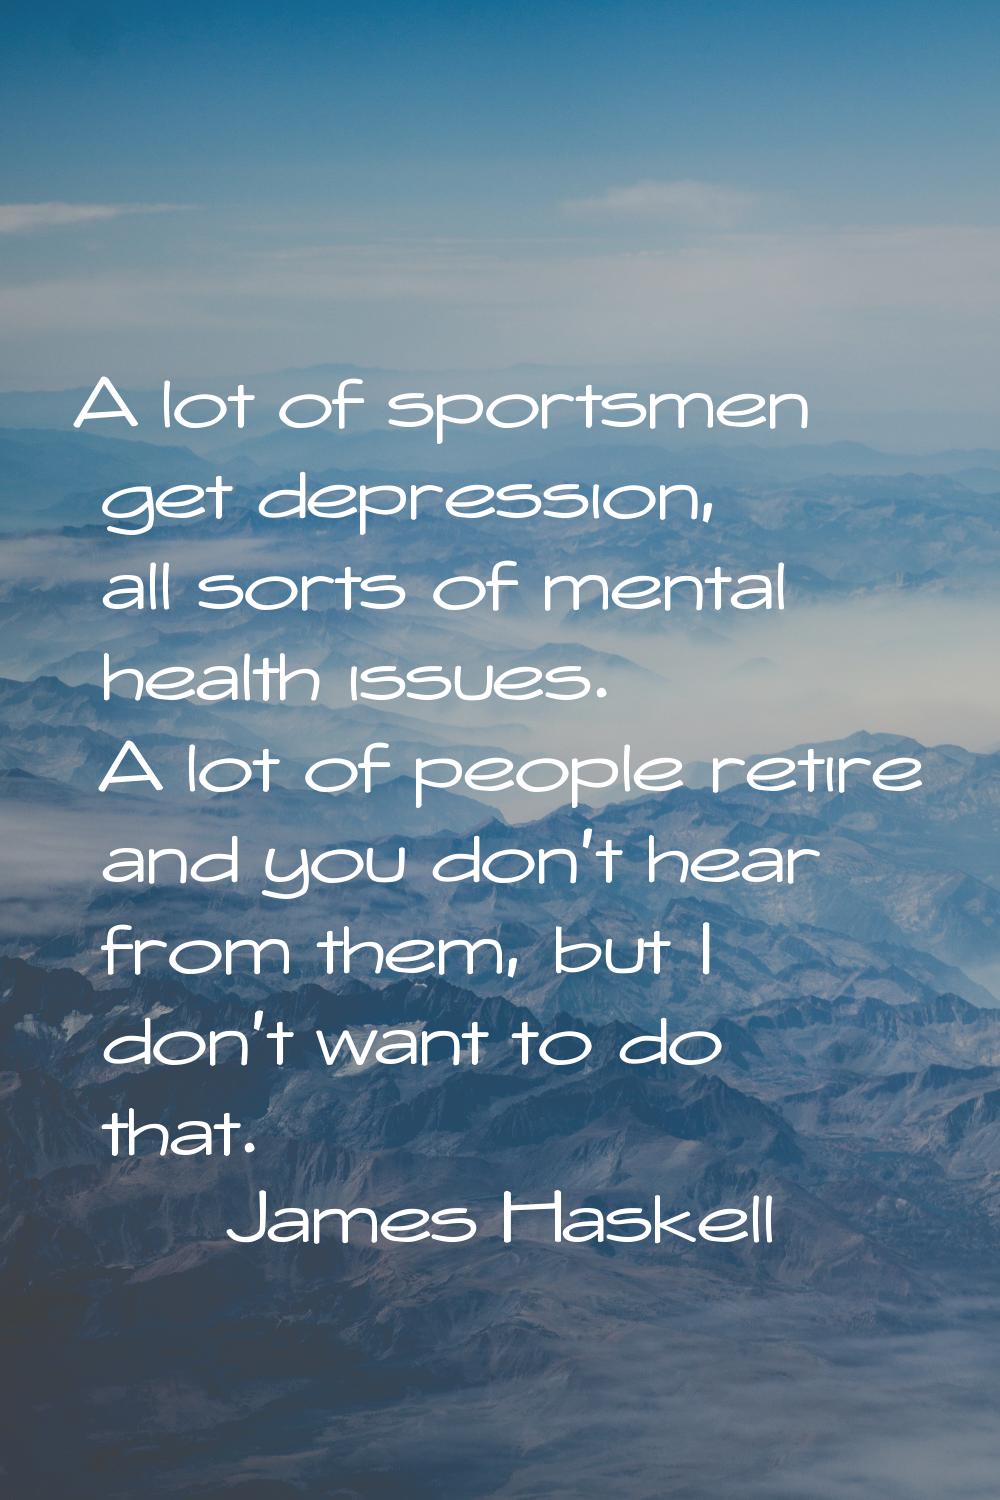 A lot of sportsmen get depression, all sorts of mental health issues. A lot of people retire and yo